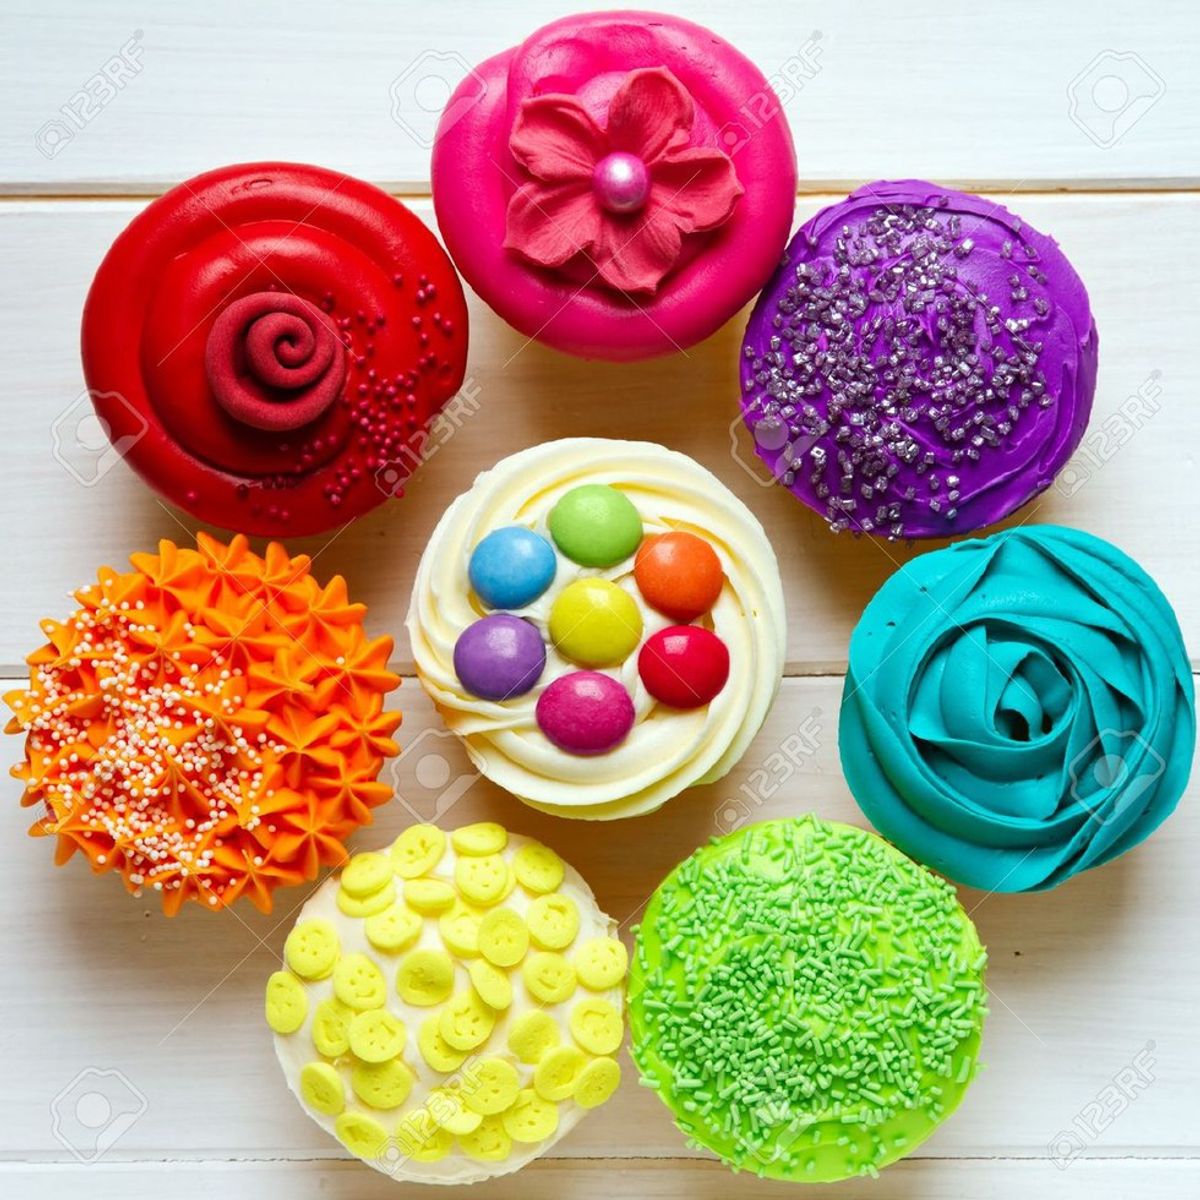 5 Easy Cupcakes To Make In A College Dorm Kitchen